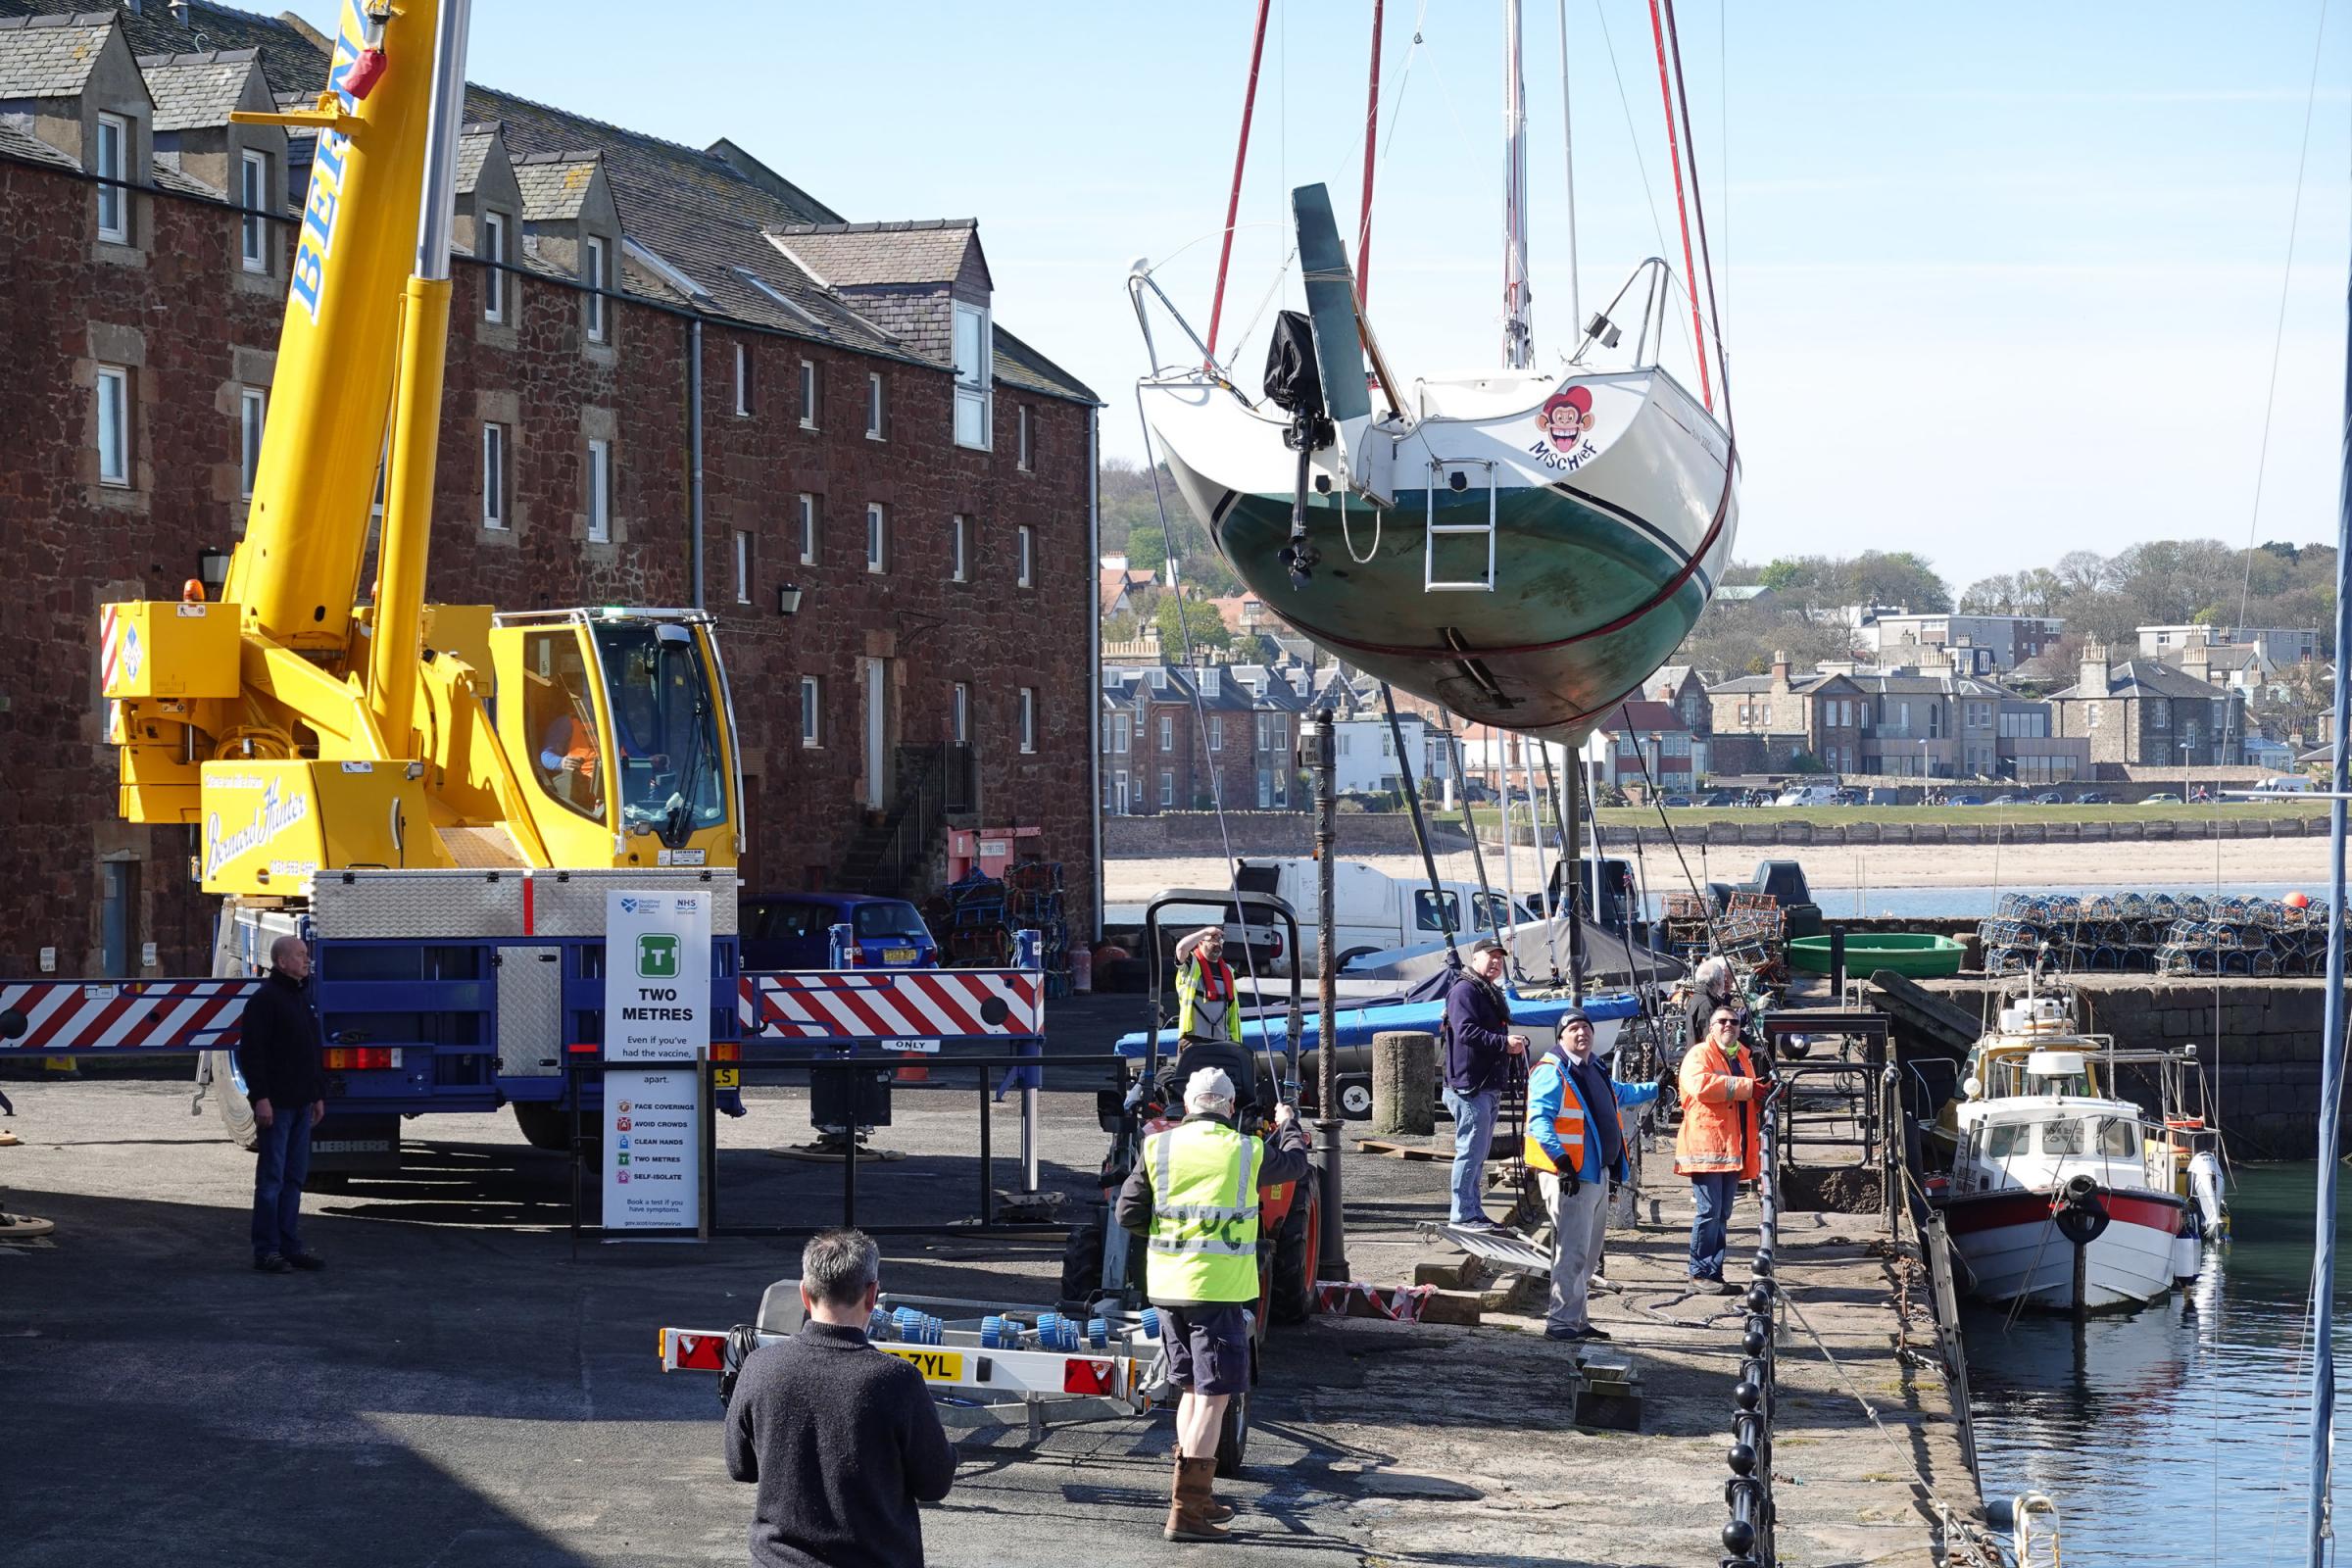 Yachts craned back into North Berwick Harbour for the summer